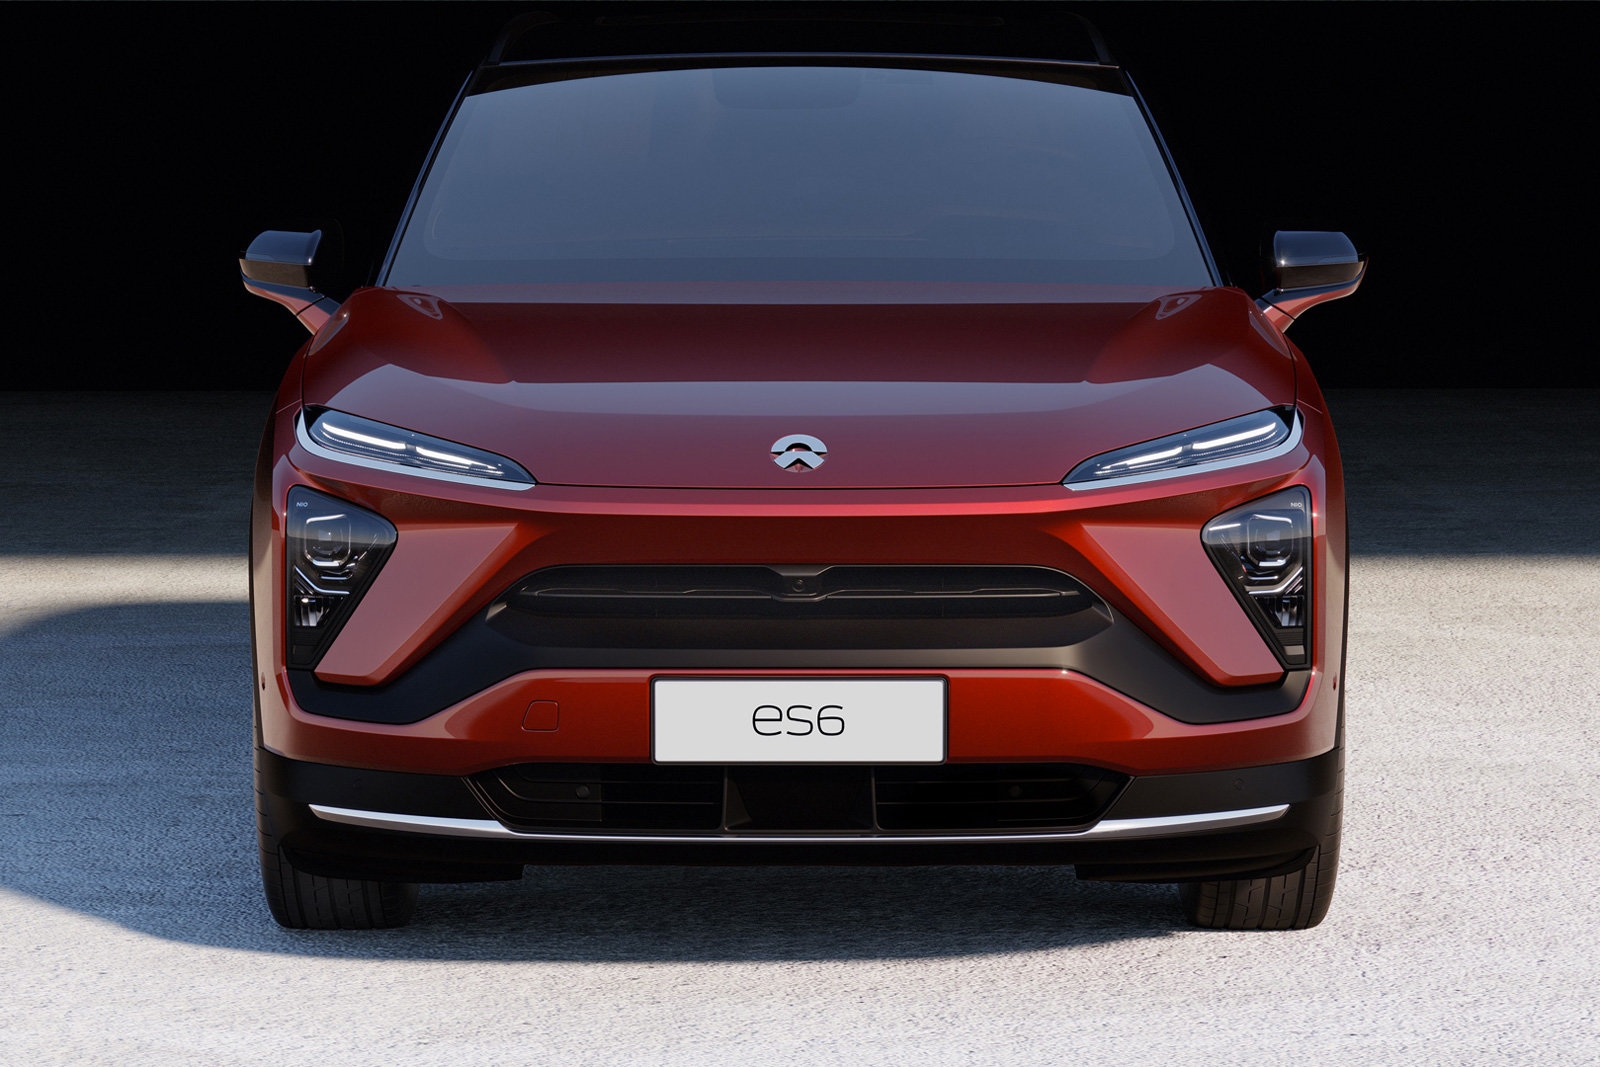 Nio unveils lower-cost ES6 electric SUV | DeviceDaily.com